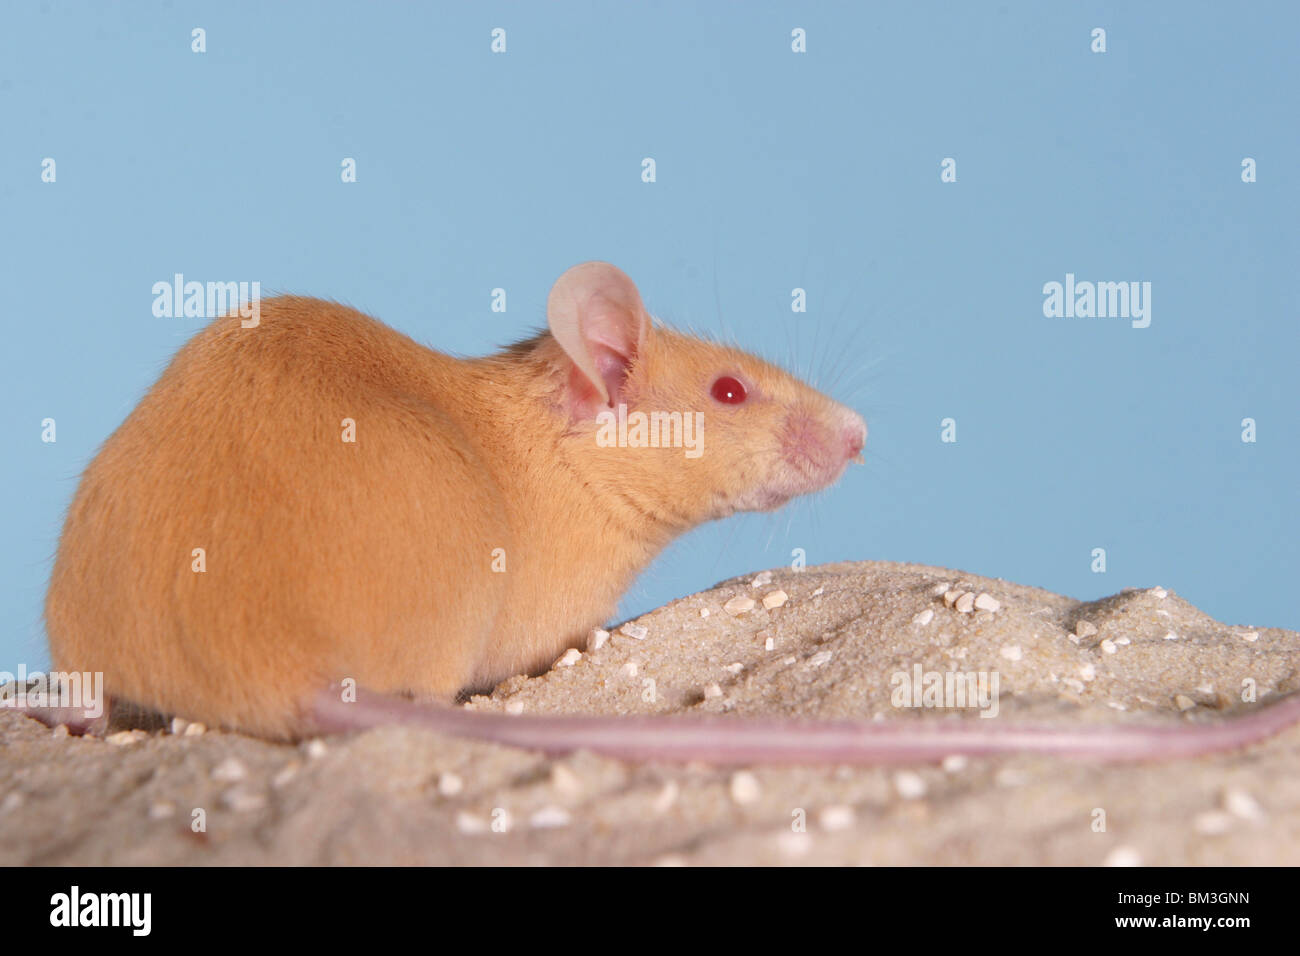 gelbe Farbmaus / yellow mouse Stock Photo